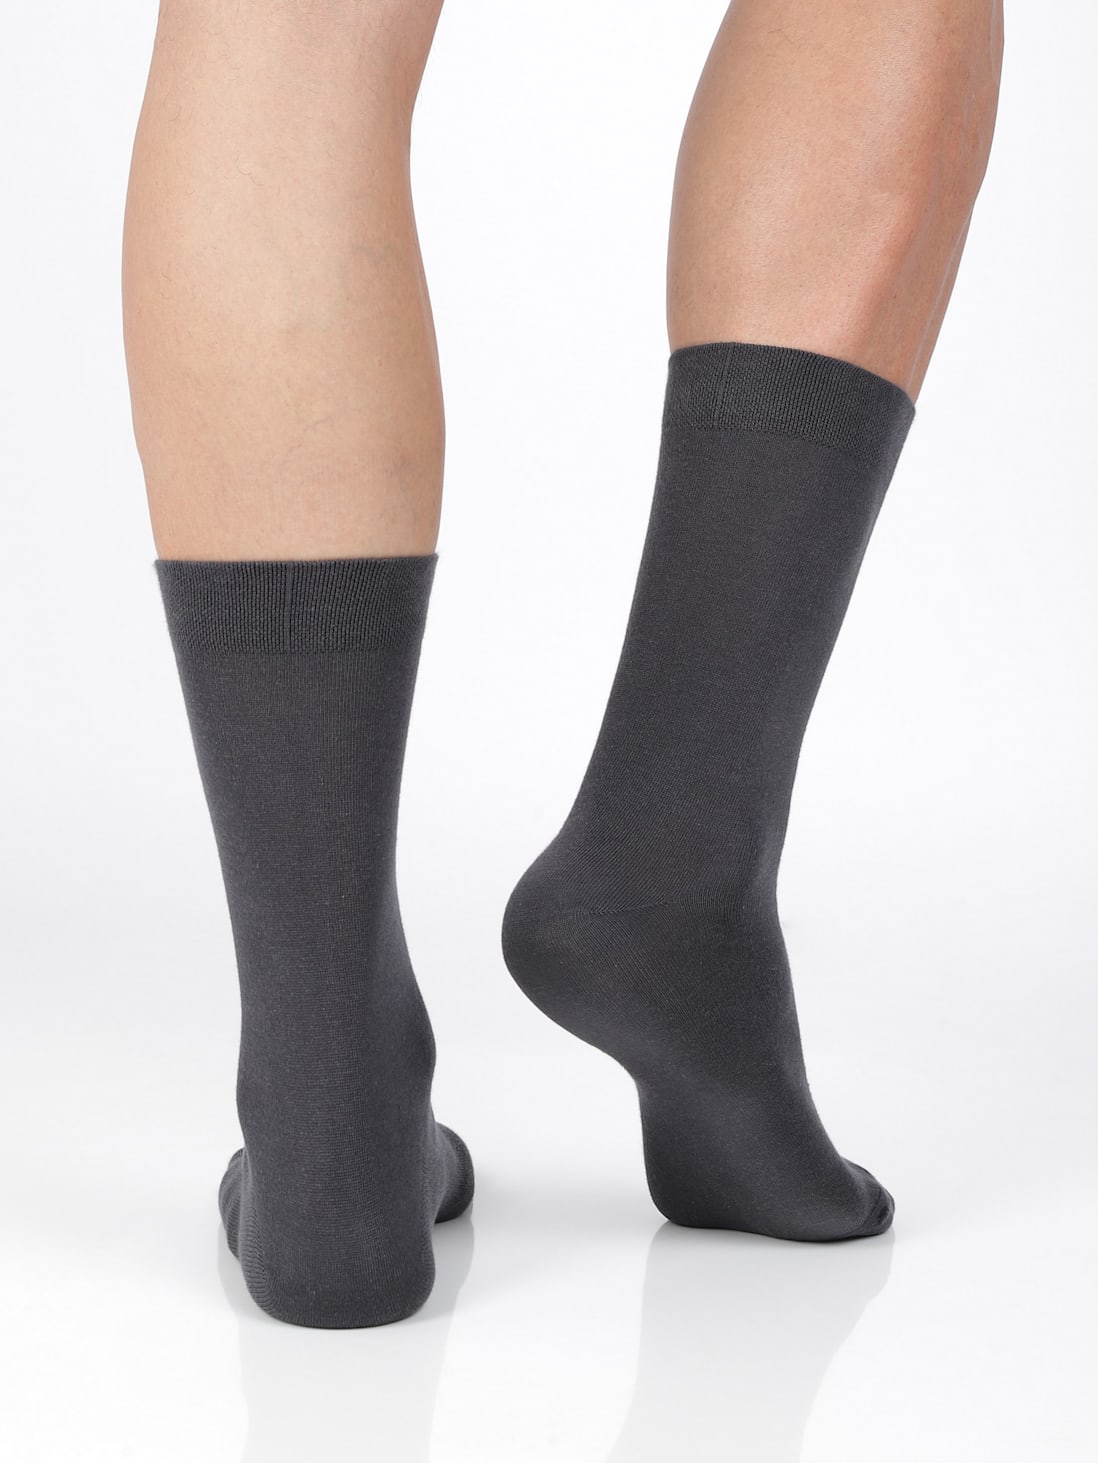 Buy Men's Modal Luxury Dress Socks Soft and Comfortable Online in India 